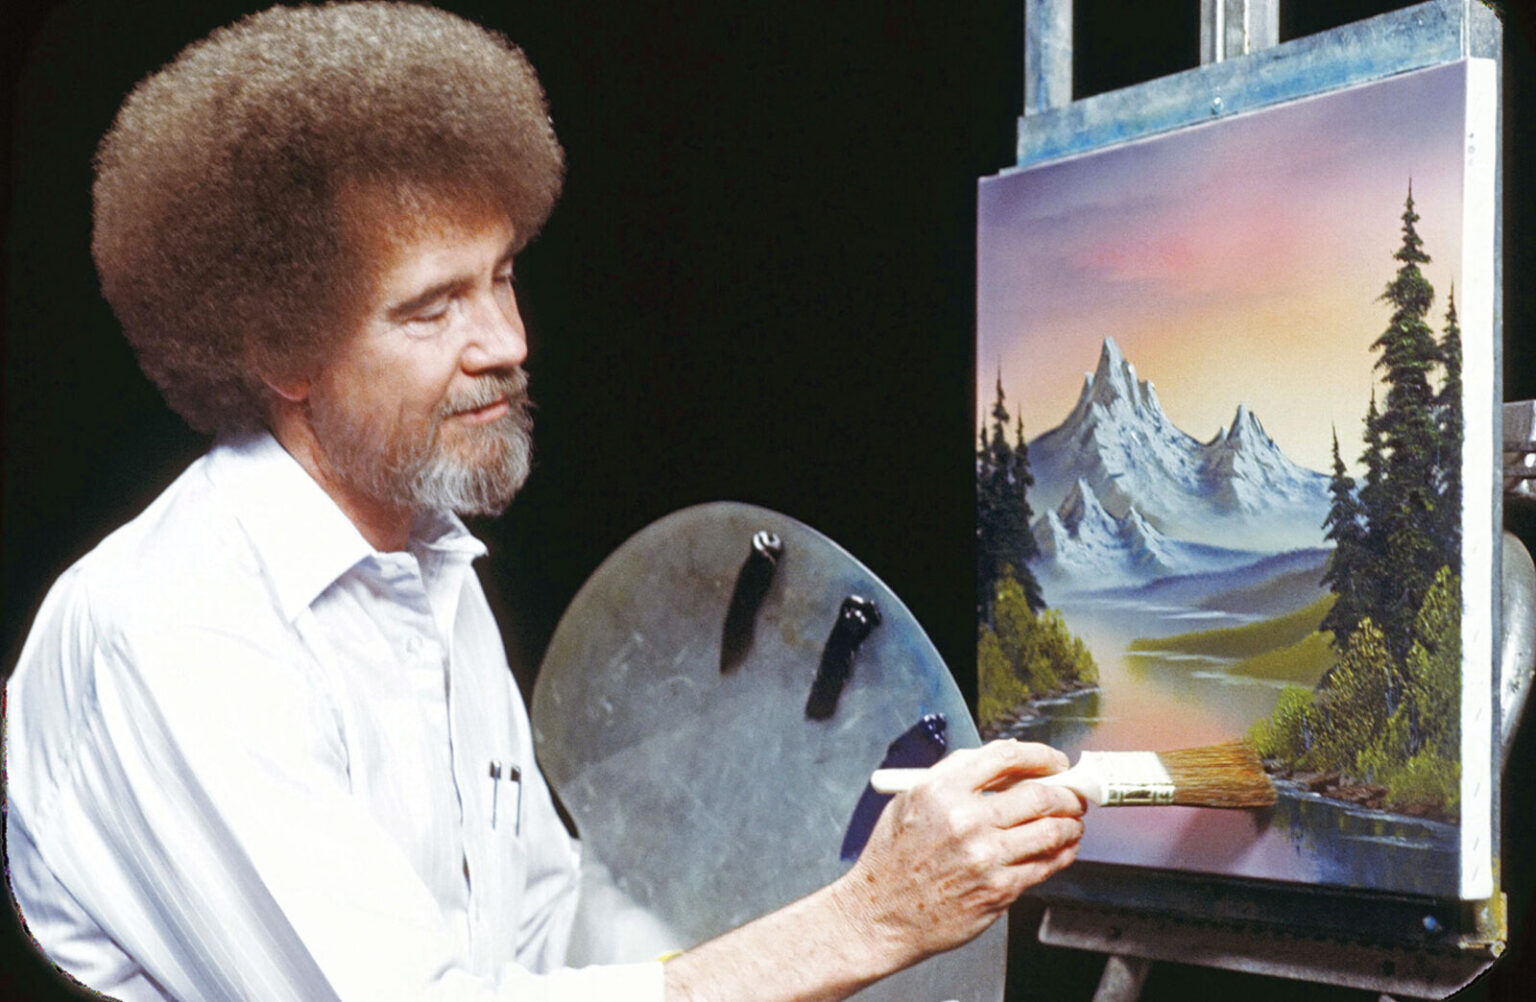 We’ve gathered all of Twitter’s best Bob Ross memes celebrating the man, the myth, the legendary keeper of happy trees: Bob Ross.